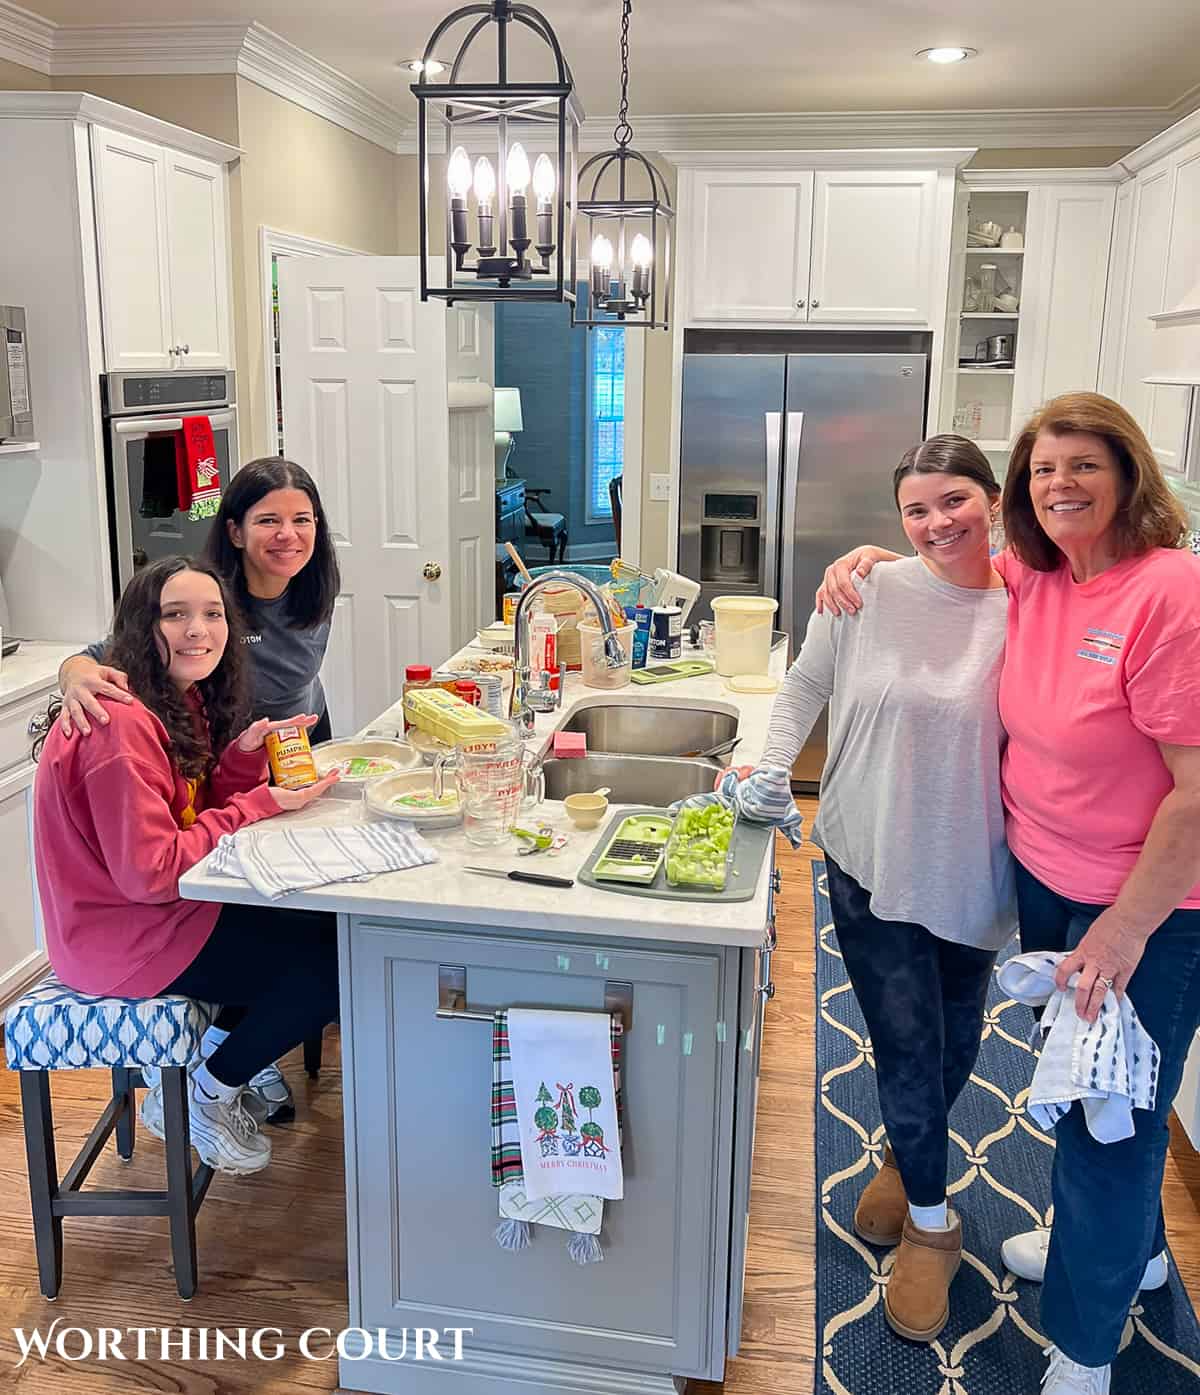 4 women standing around an island in a kitchen with white cabinets